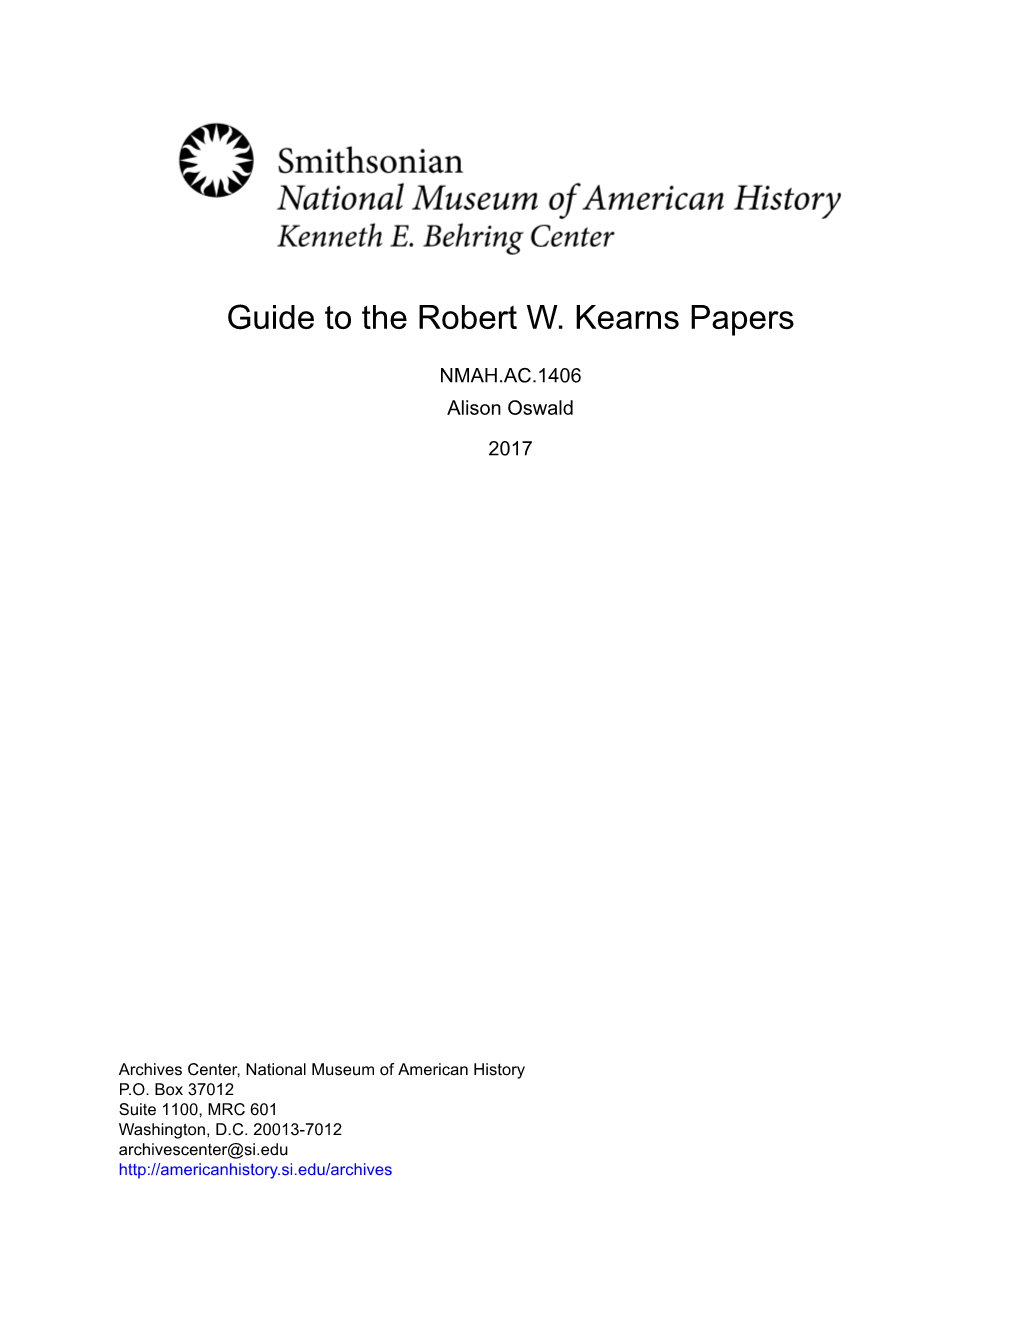 Guide to the Robert W. Kearns Papers